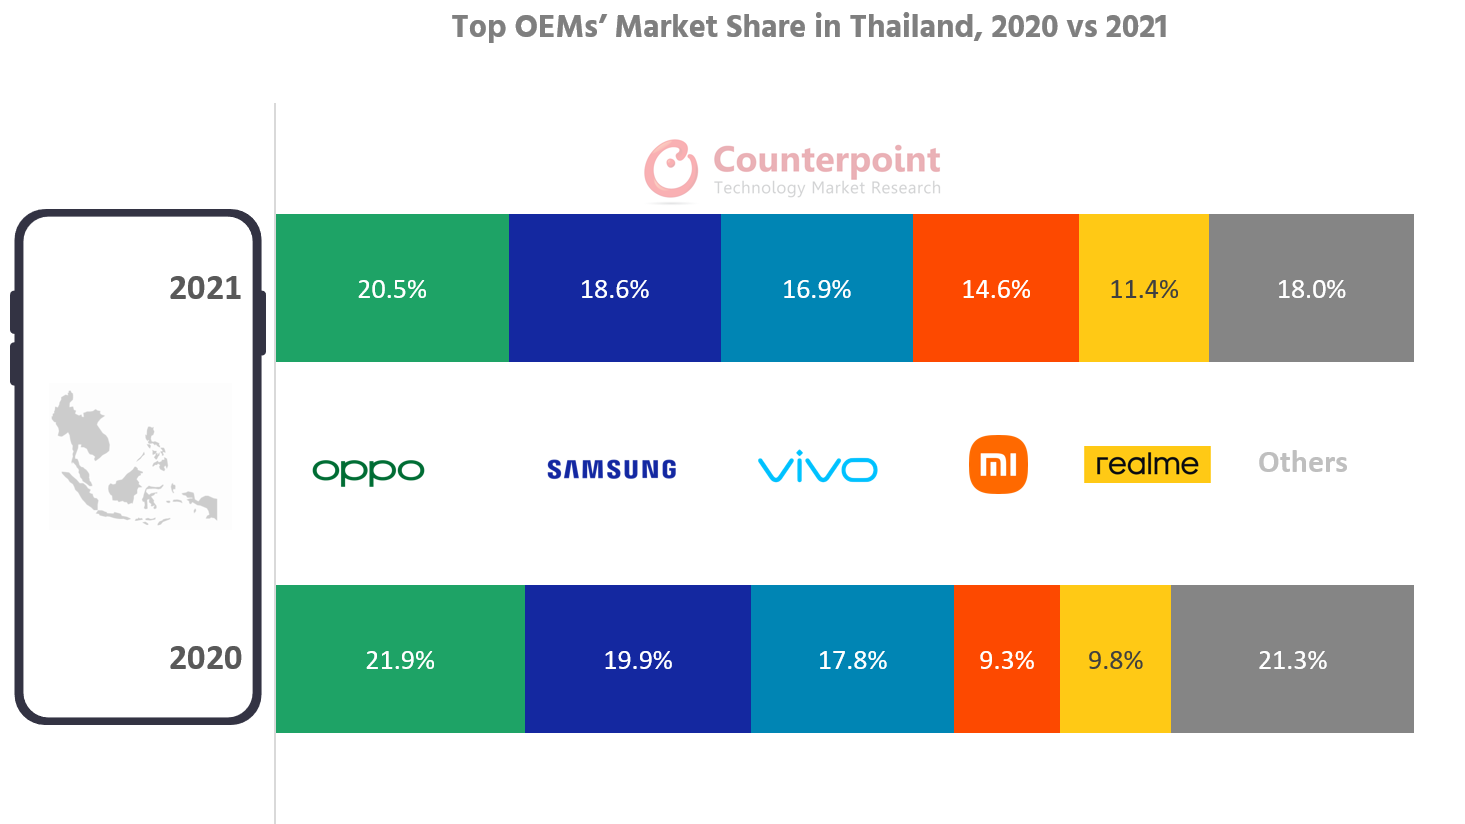 Top OEMs Market Share in Thailand 2020 vs 2021